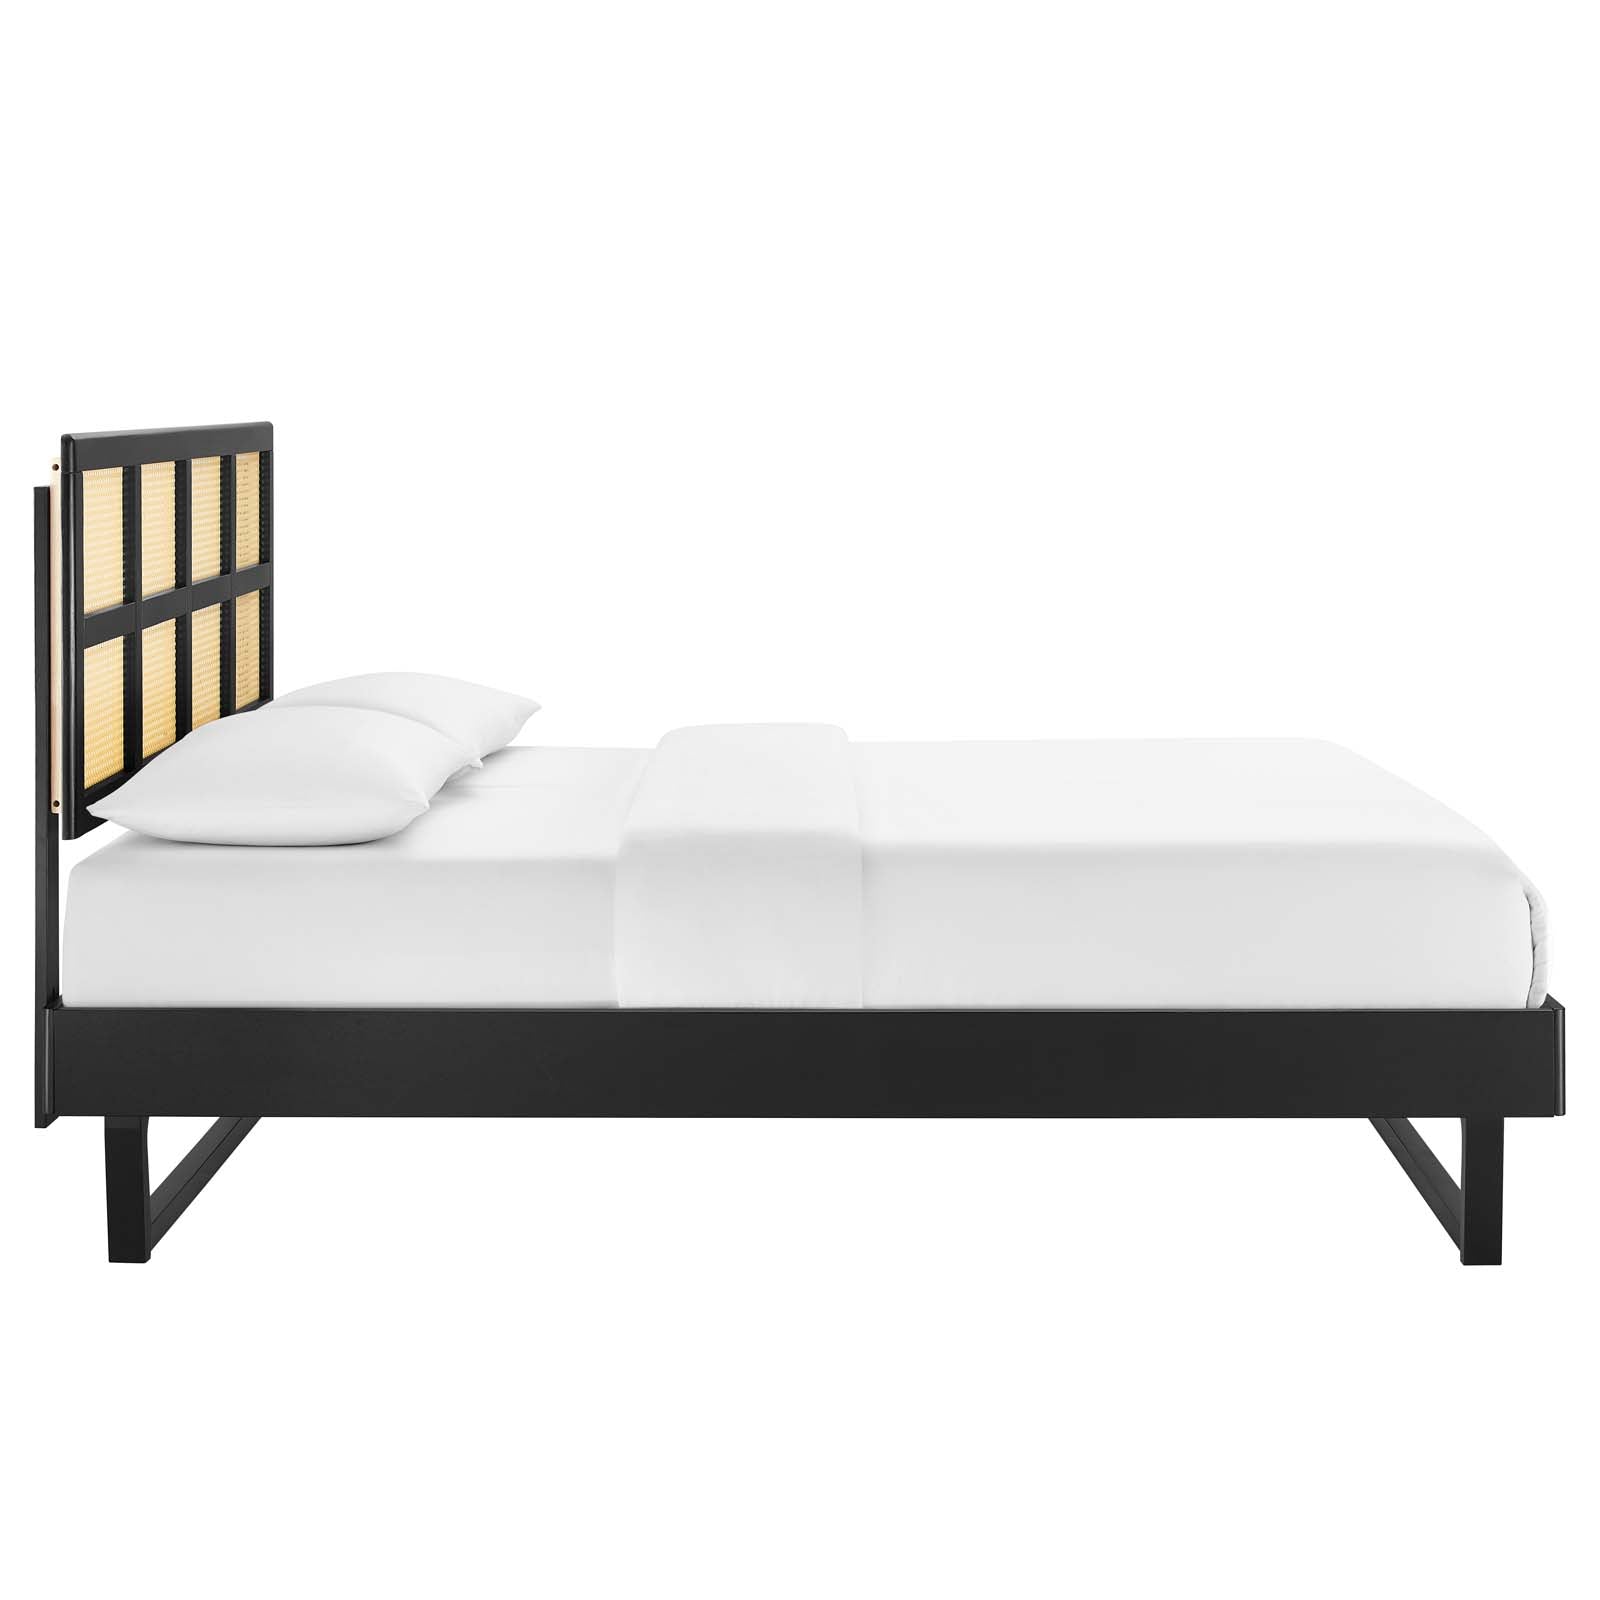 Sidney Cane and Wood Full Platform Bed With Angular Legs